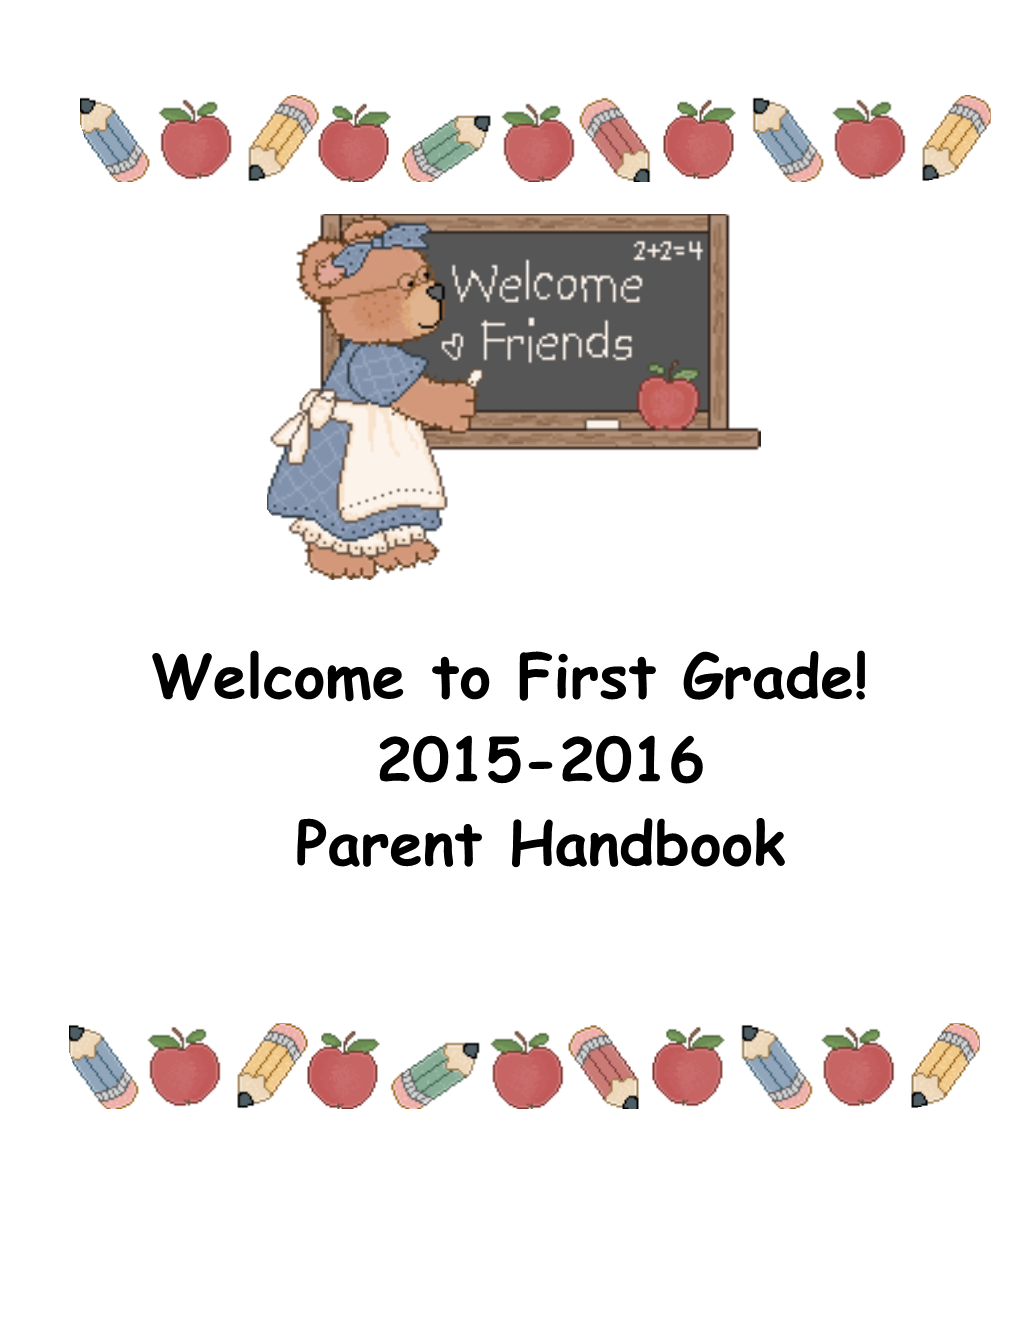 Welcome to First Grade! s1